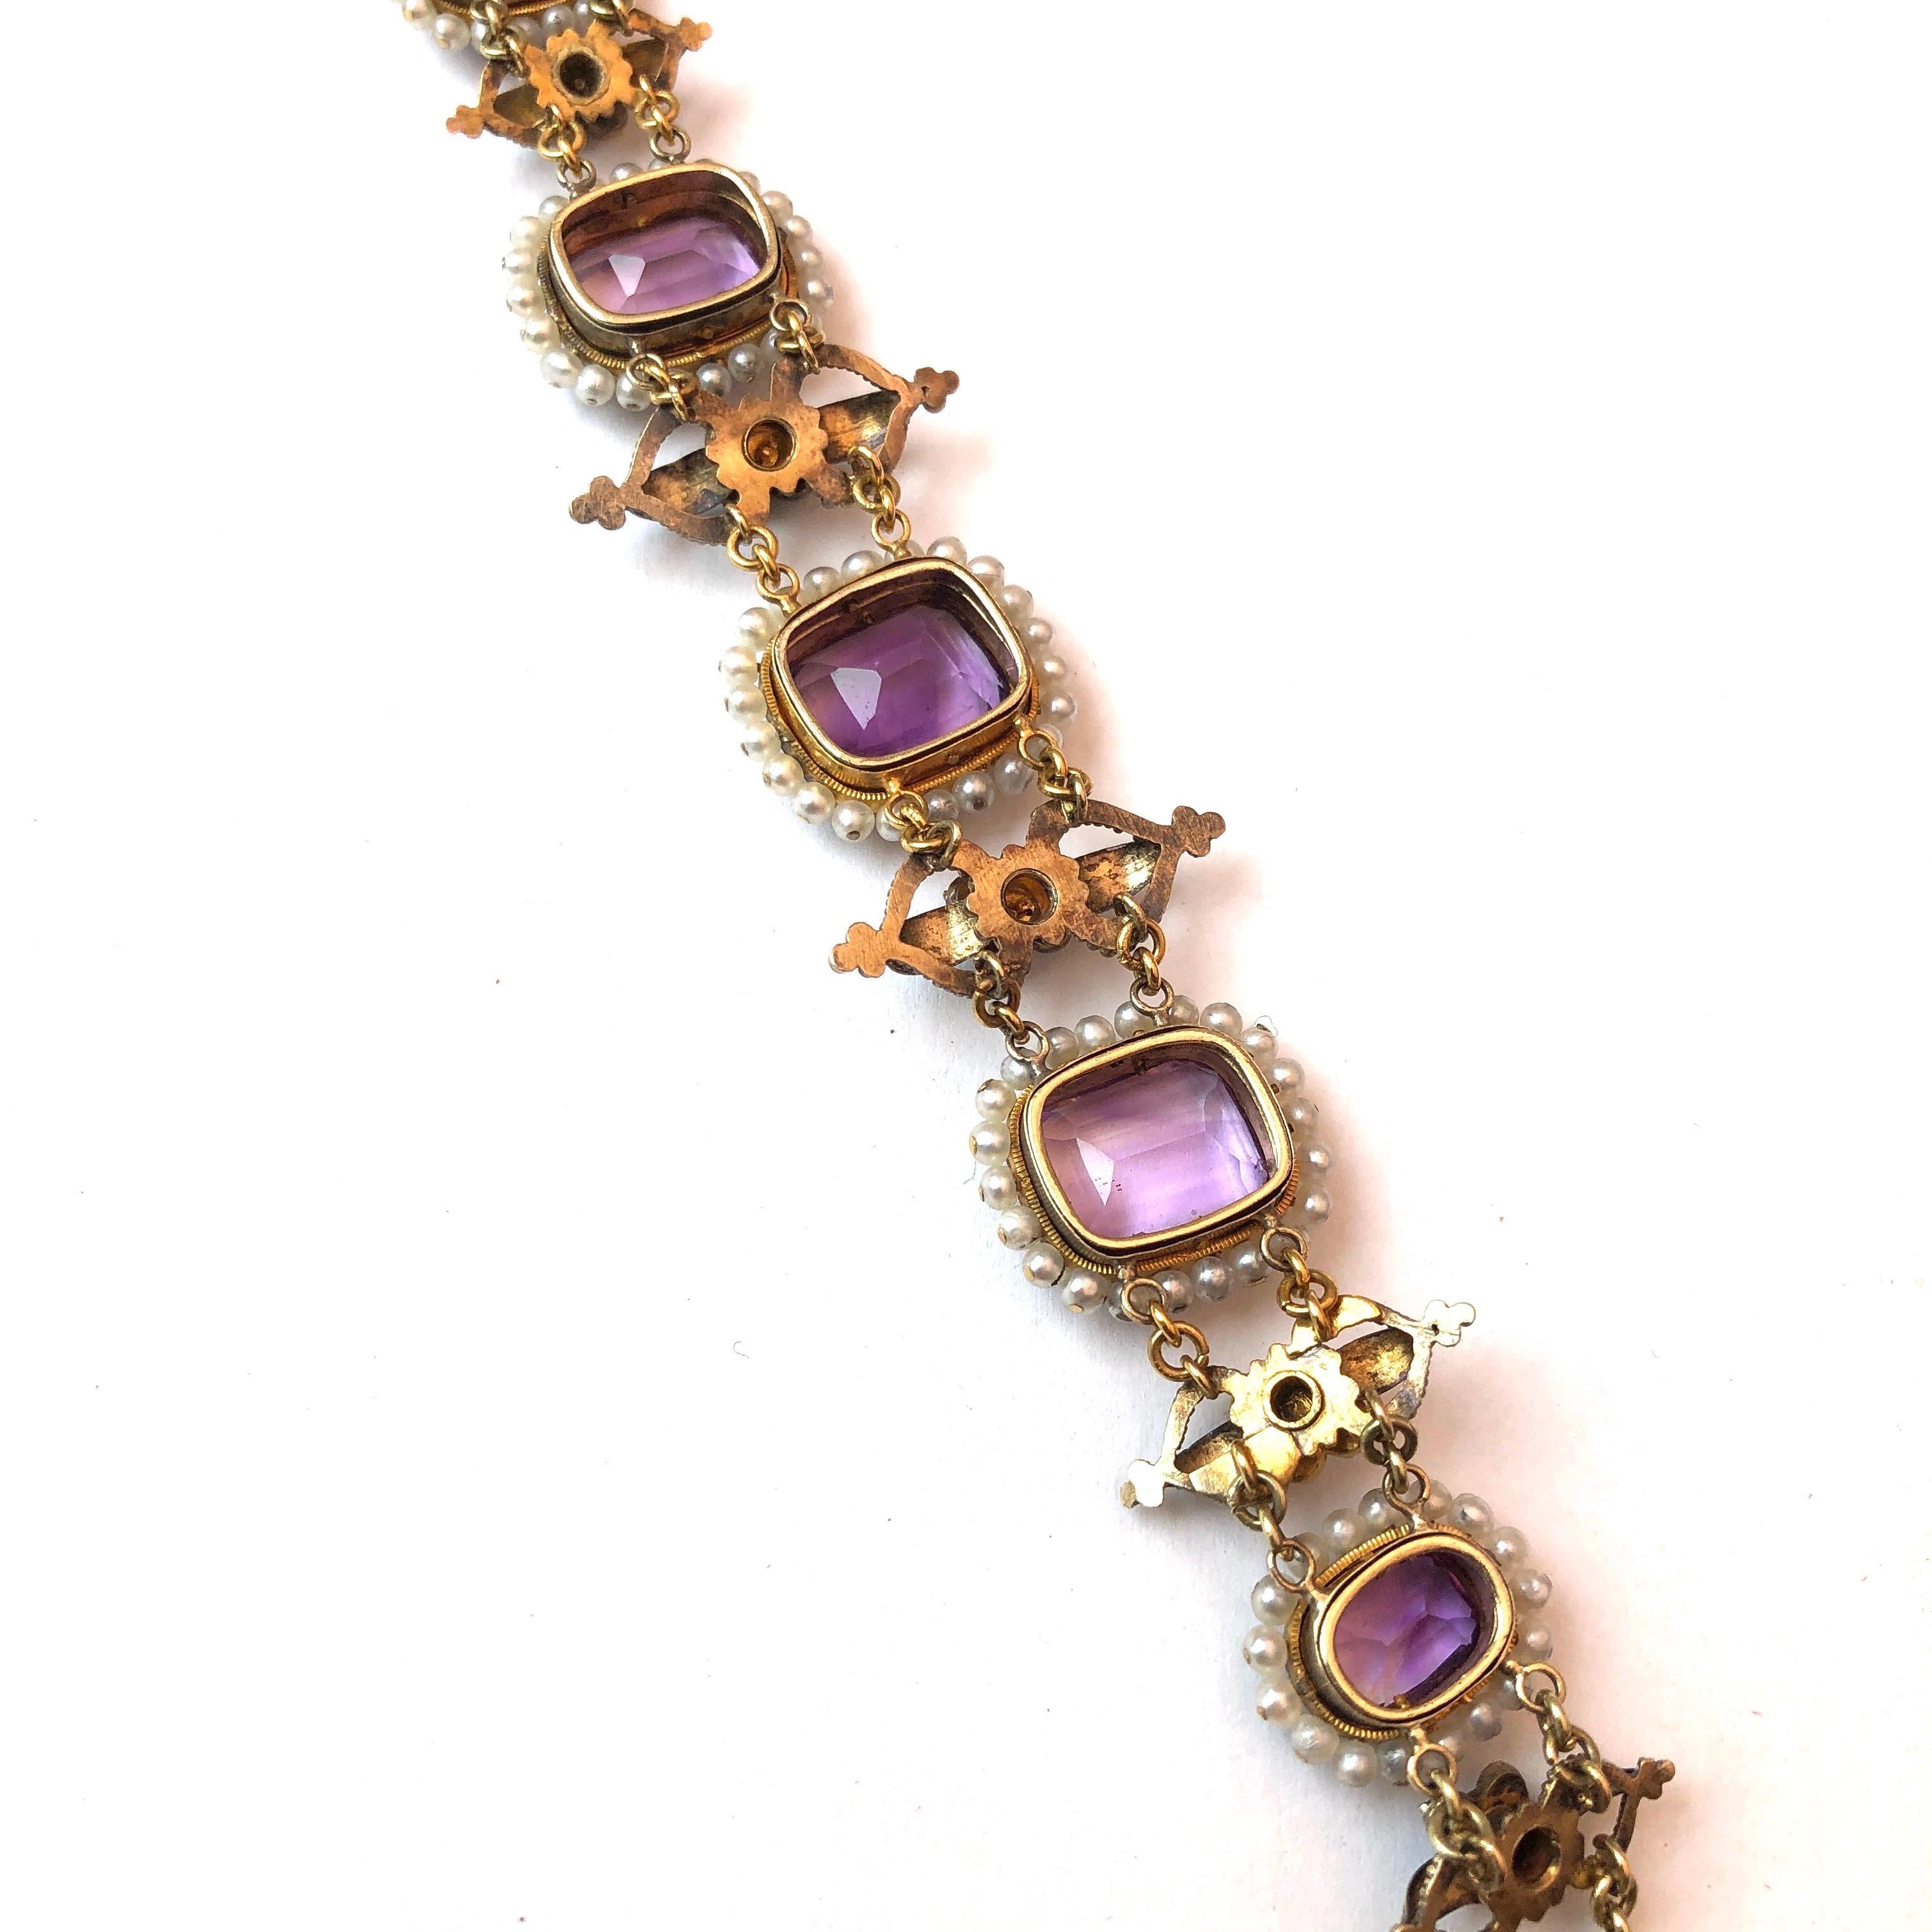 This fancy bracelet holds 6 larger Amethyst stones and in-between each one is a flower cluster of four smaller ones. Surrounding each larger stone is a halo of glossy pearls which really make the colour of the amethysts pop. The bracelet is modelled